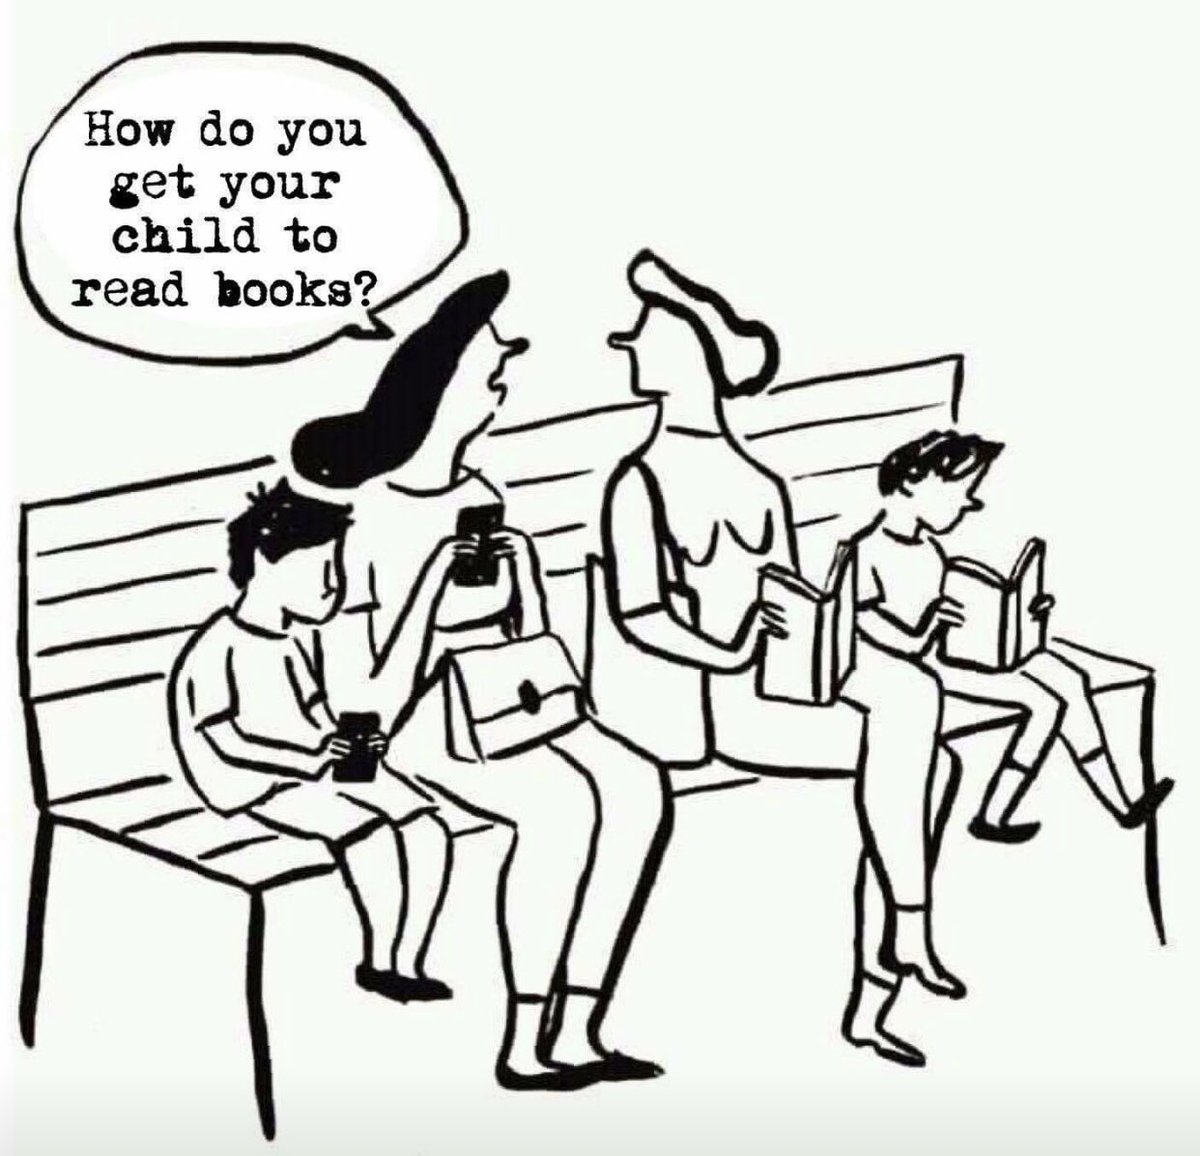 Ran across this cartoon while surfing Facebook (ironically).  However, this applies to all aspects of our lives. Children take their cues for life by our actions. This will prompt me to be more mindful on the example I set.  Our students need it more than ever. #StartsAtHome